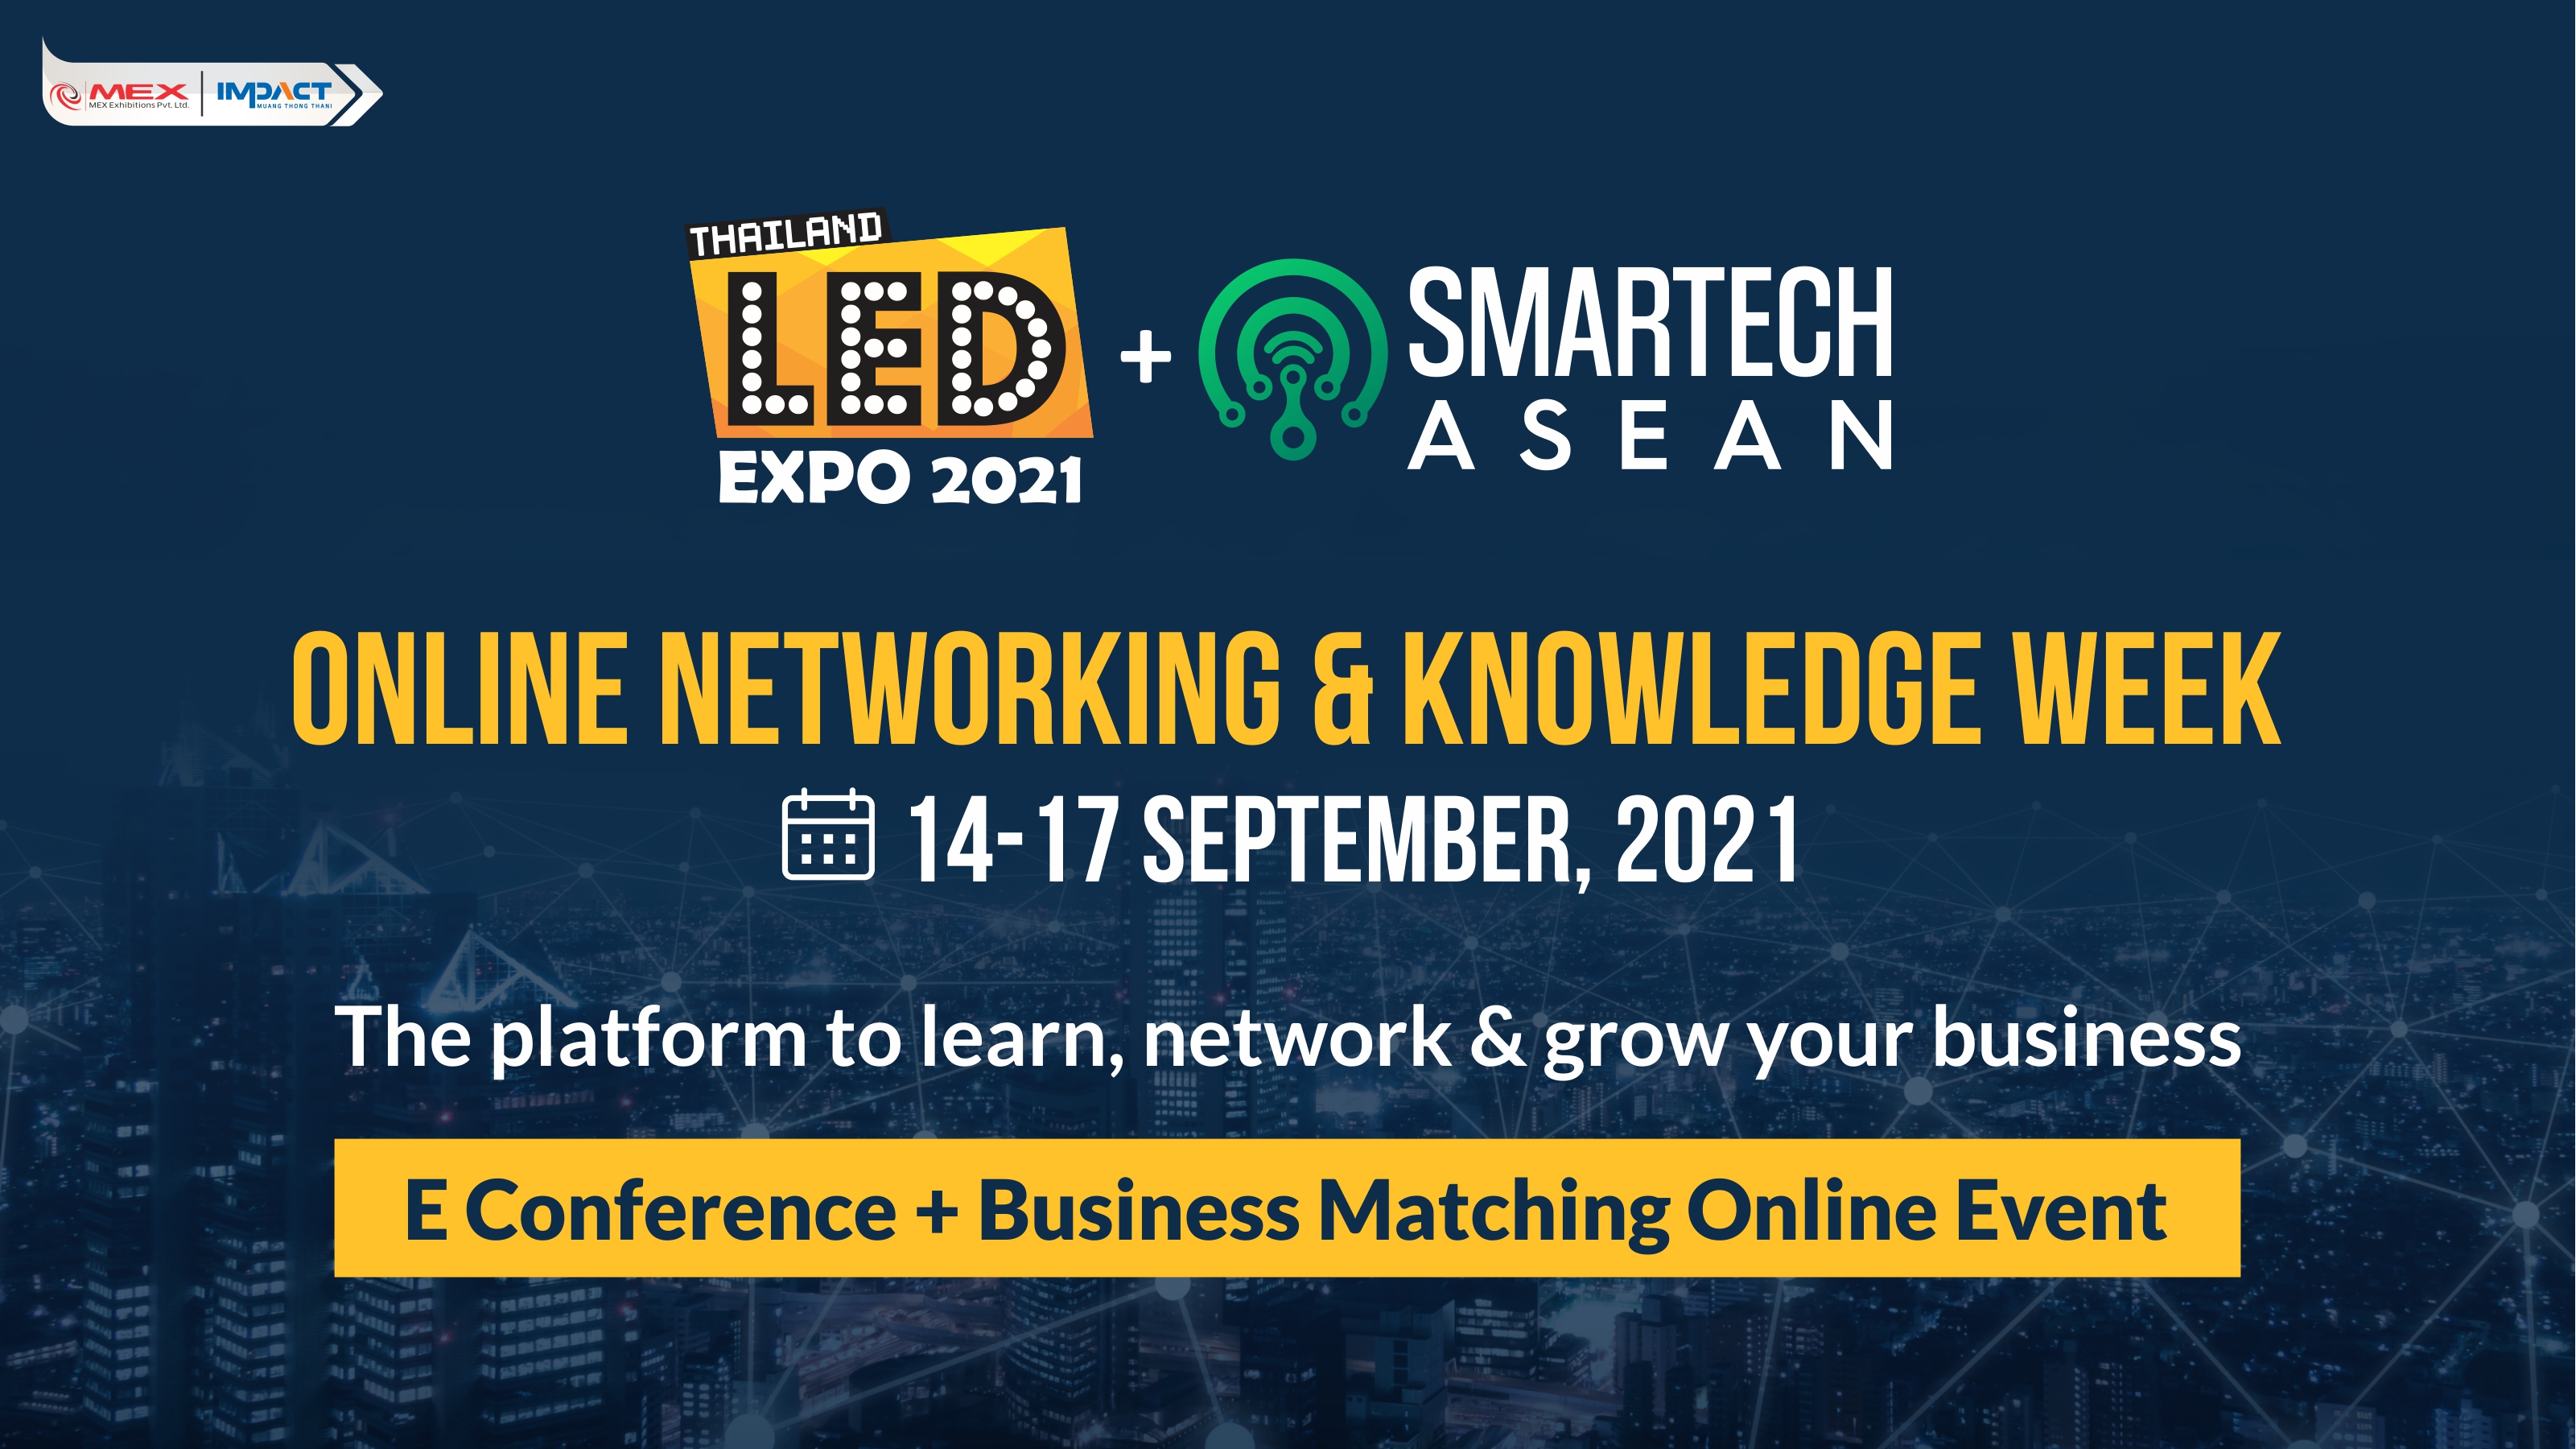 LED Expo Thailand + SMARTECH ASEAN Online Networking & Knowledge Week, Bangkok, Thailand